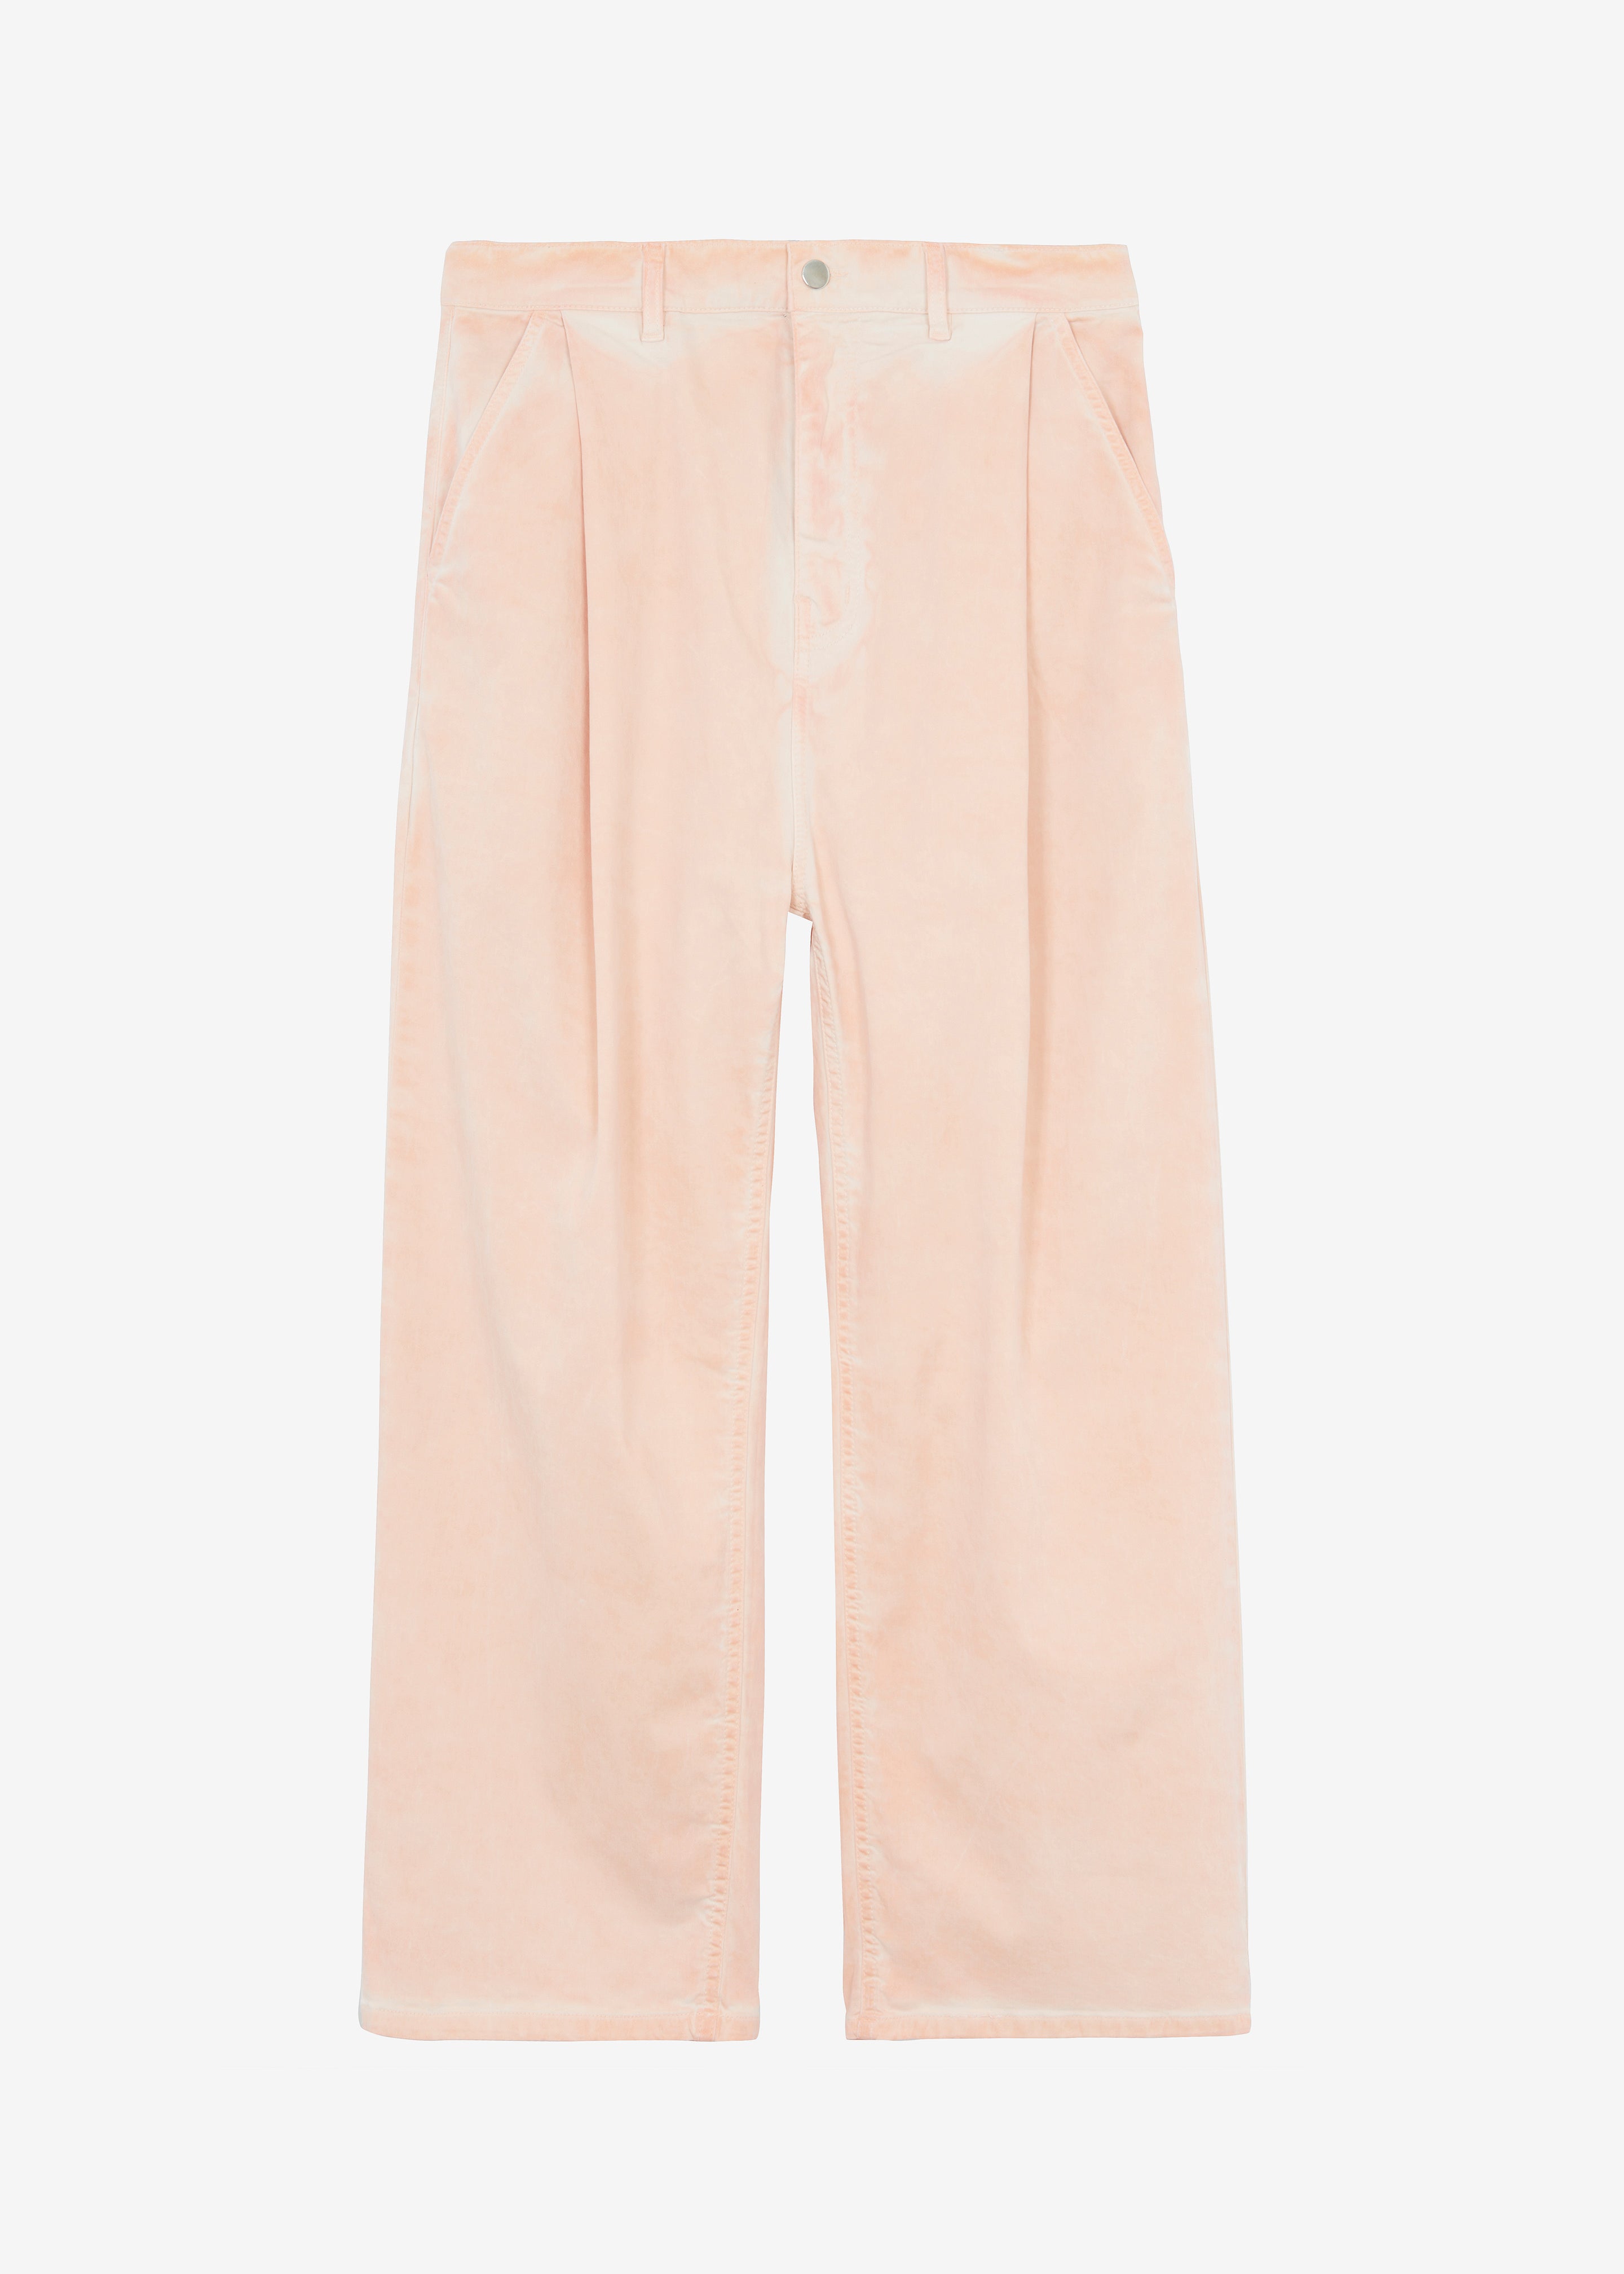 Drew Pants - Faded Pink - 8